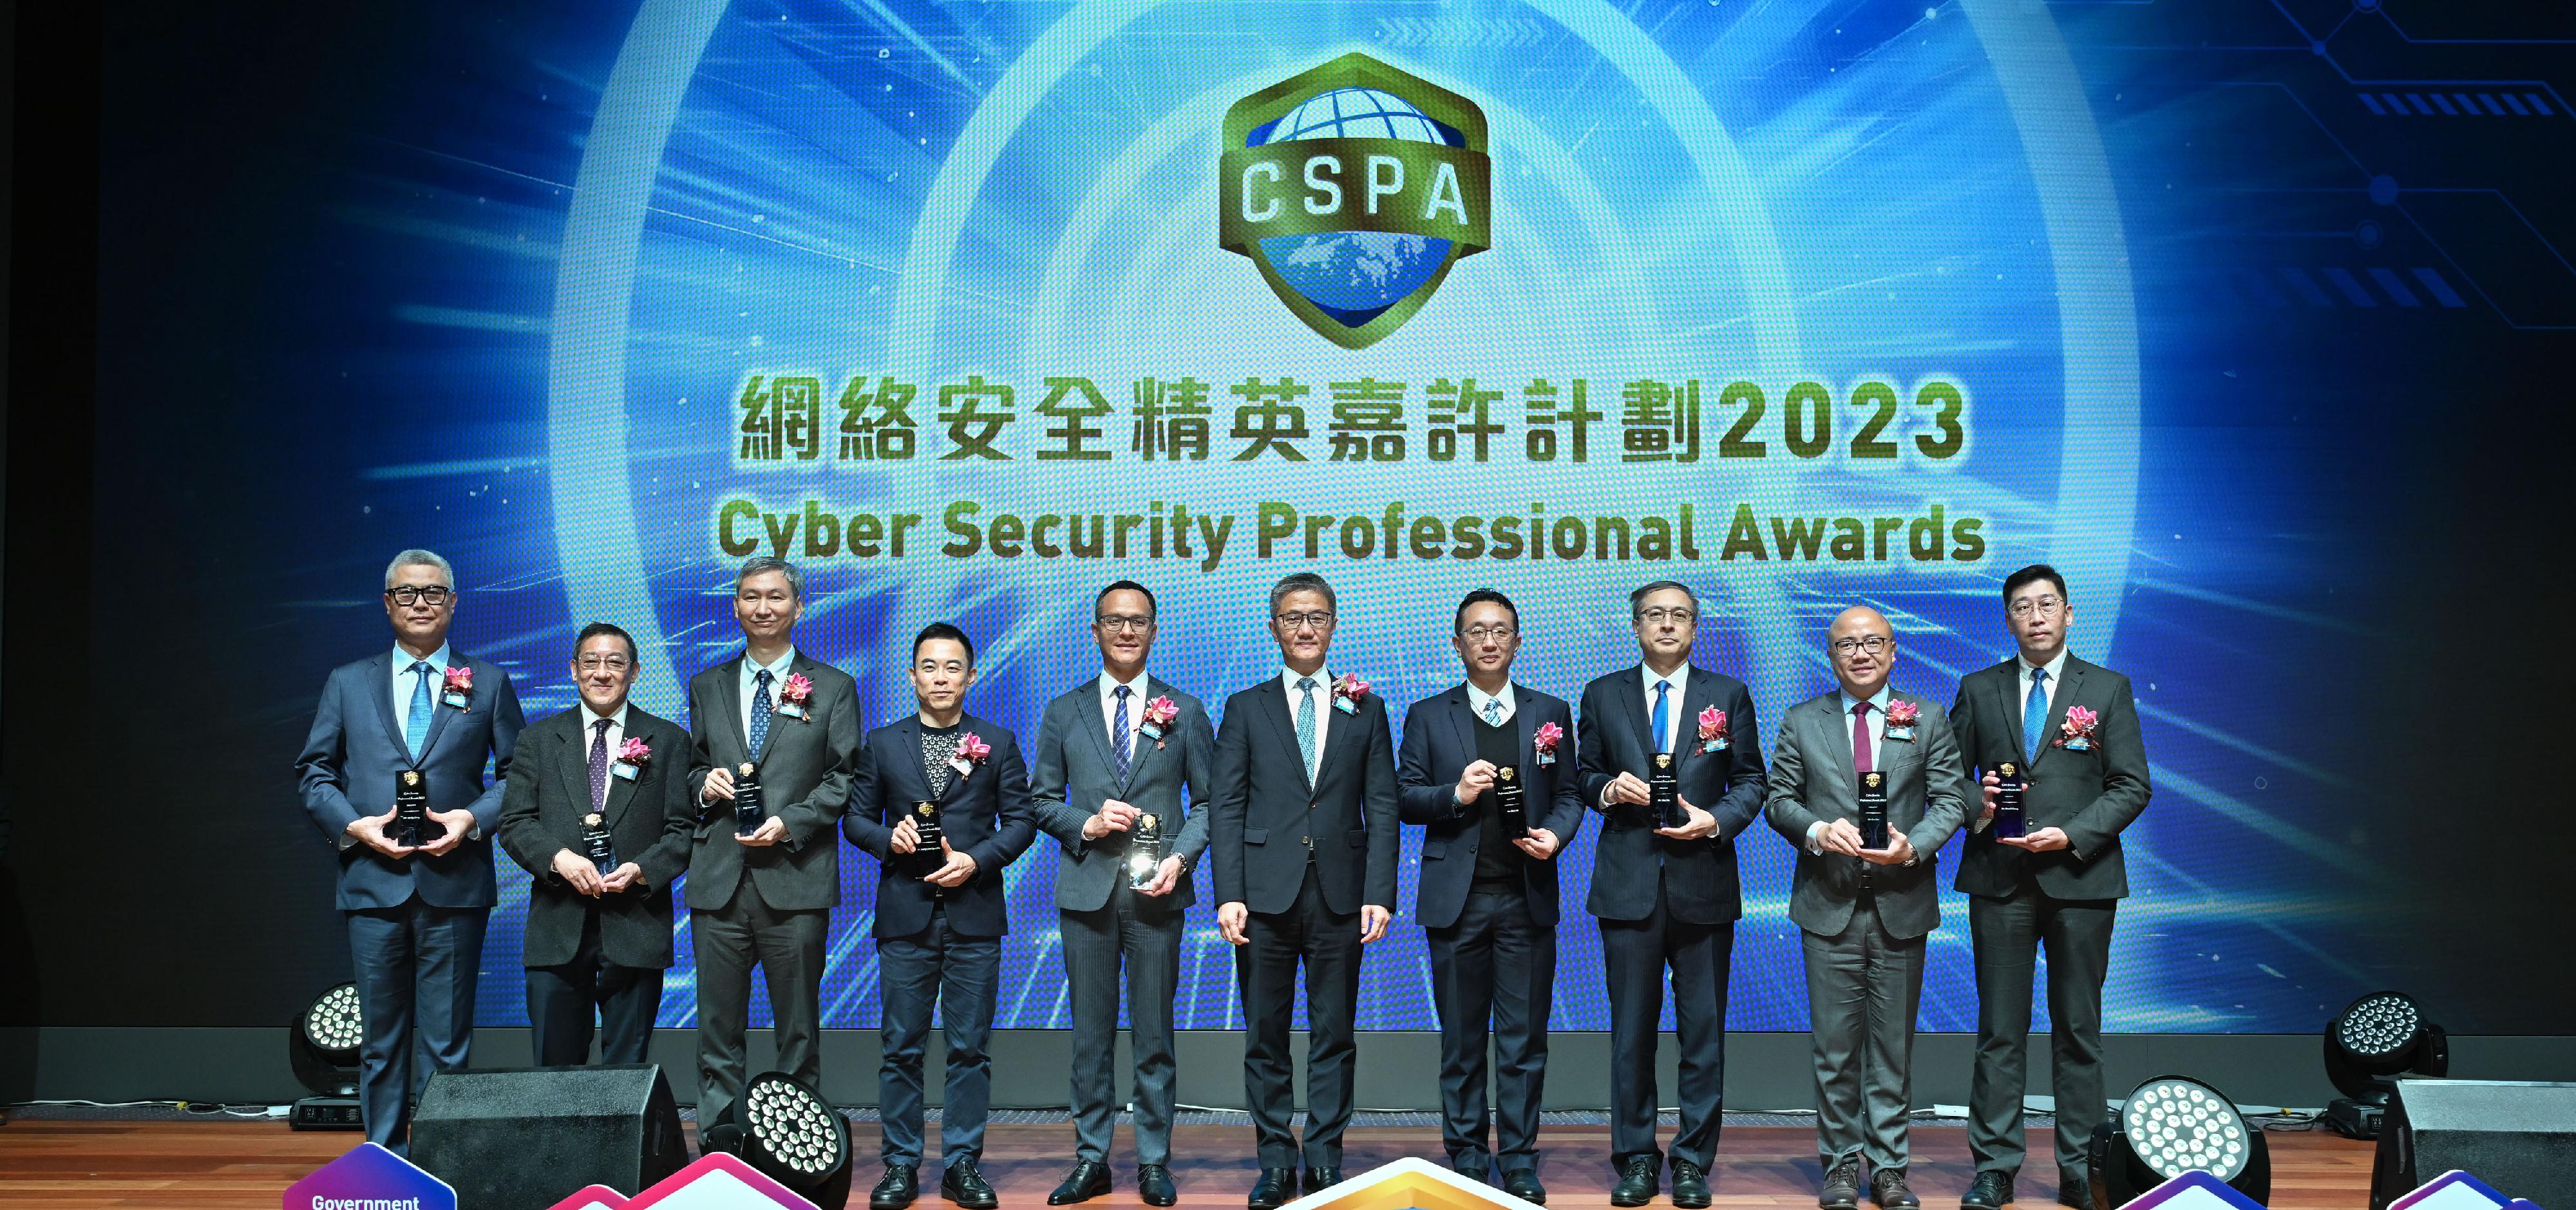 The Cyber Security Professional Awards 2023 presentation ceremony was held by the Hong Kong Police Force today (February 29). Photo shows the Commissioner of Police, Mr Siu Chak-yee (sixth left); presenting souvenirs to nine members of the judging panel of the award scheme.